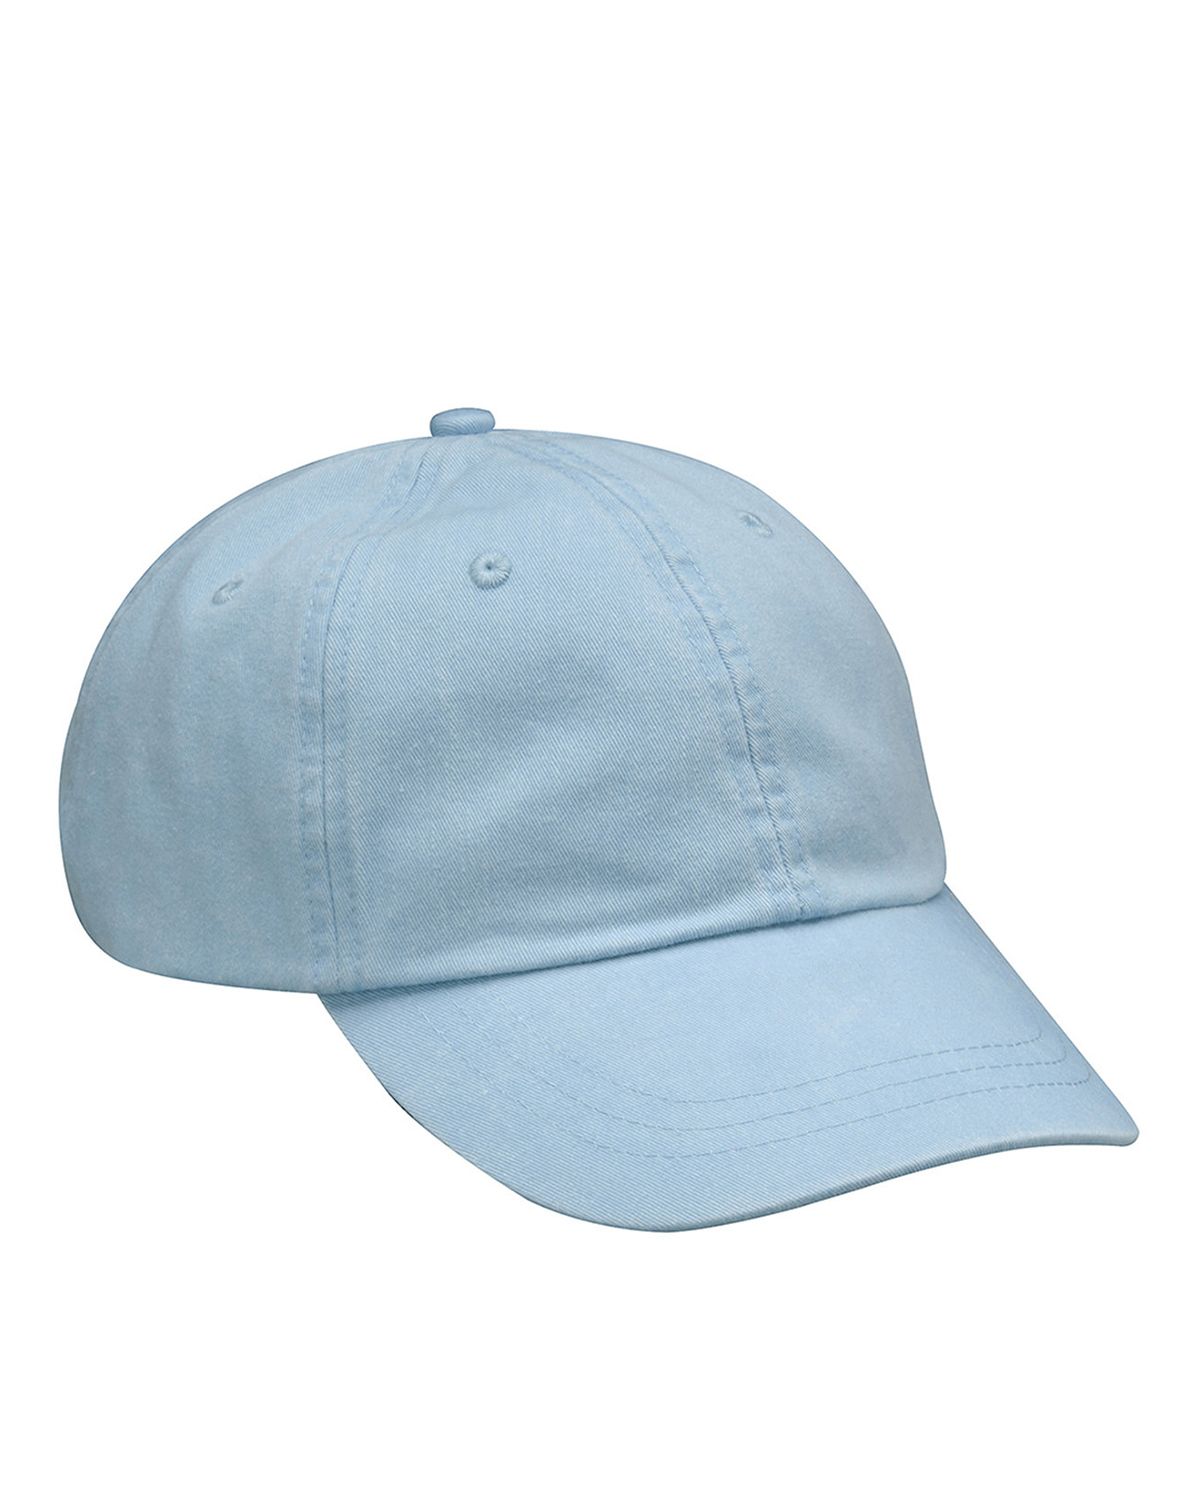 Buy Adams AD969 6 Panel Low Profile Washed Pigment Dyed Cap ...